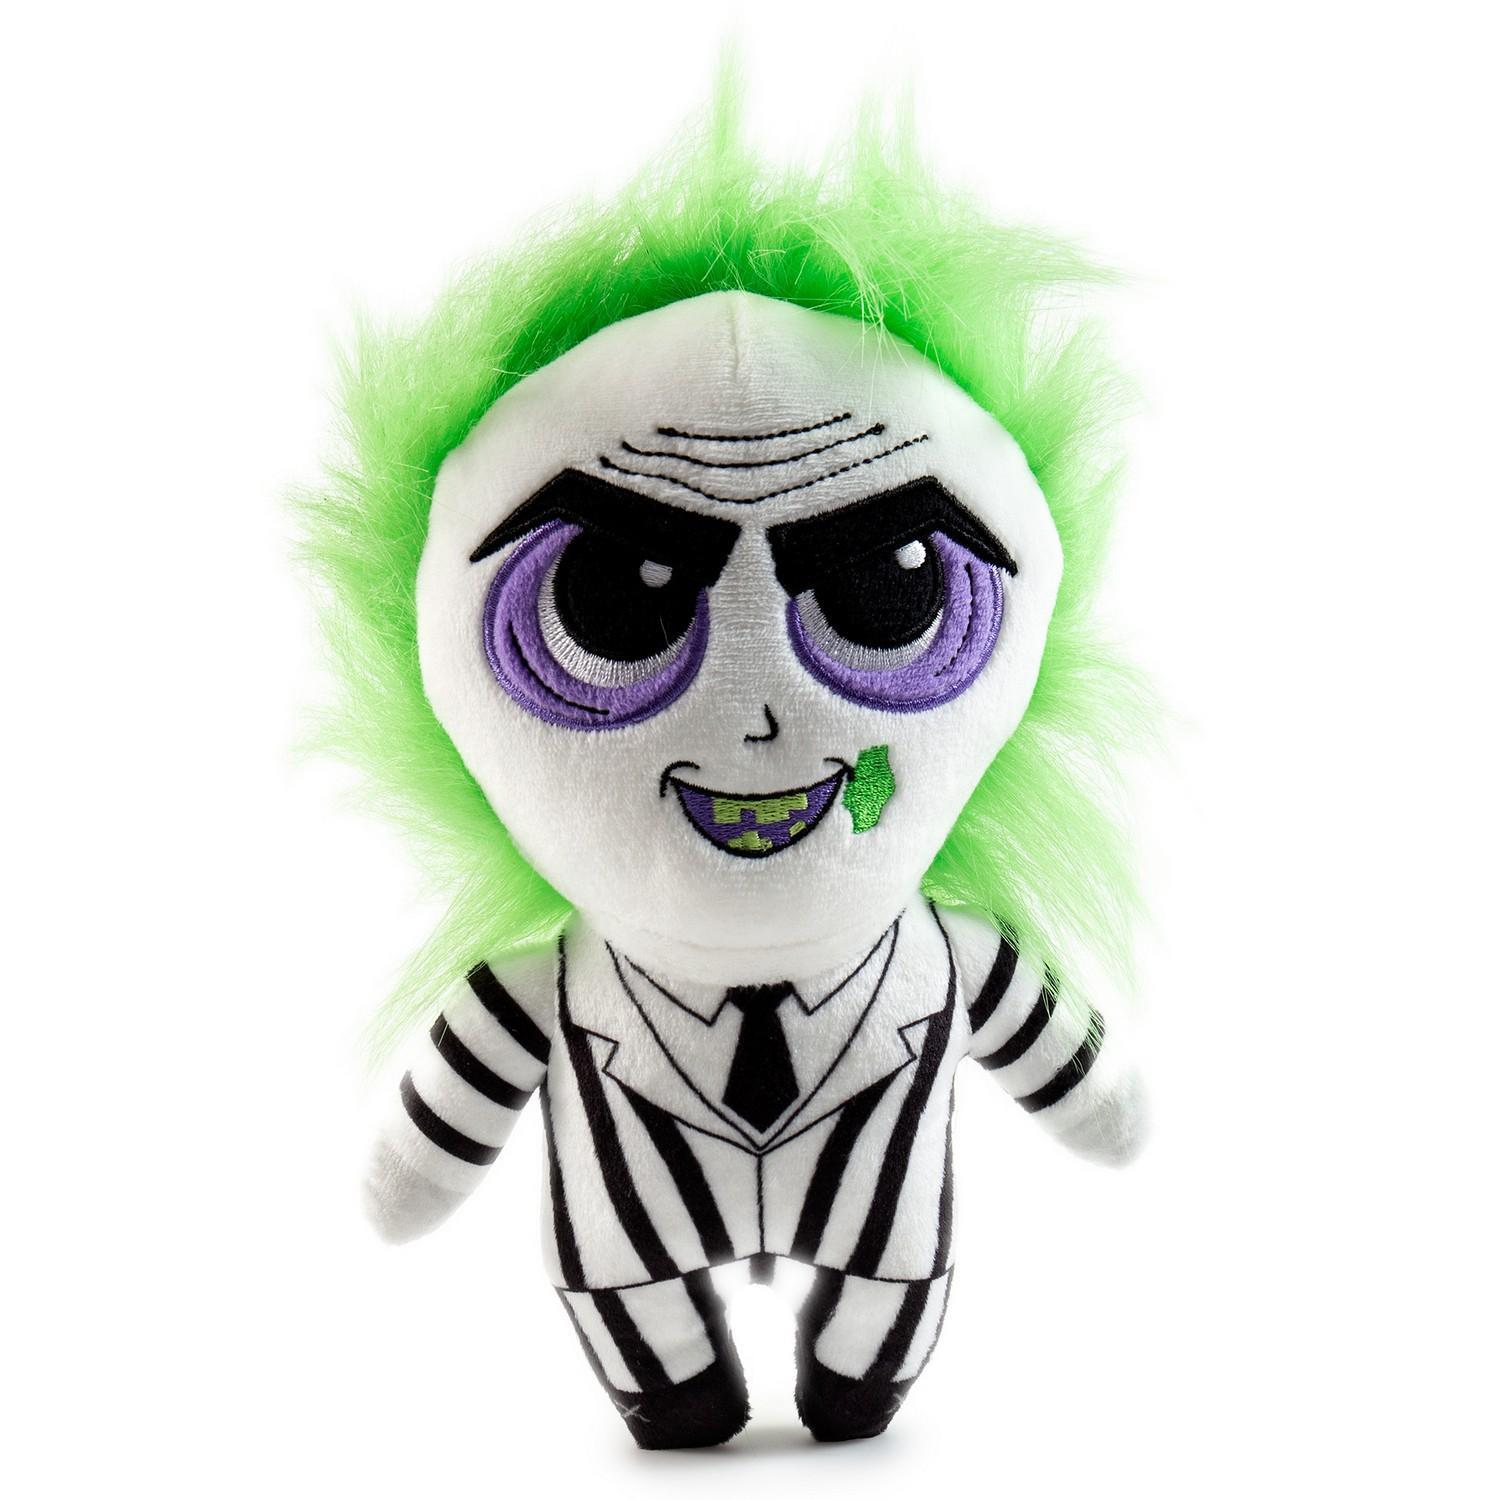 Beetlejuice Phunny Character Plush Toy (Black/White/Green) (One Size)